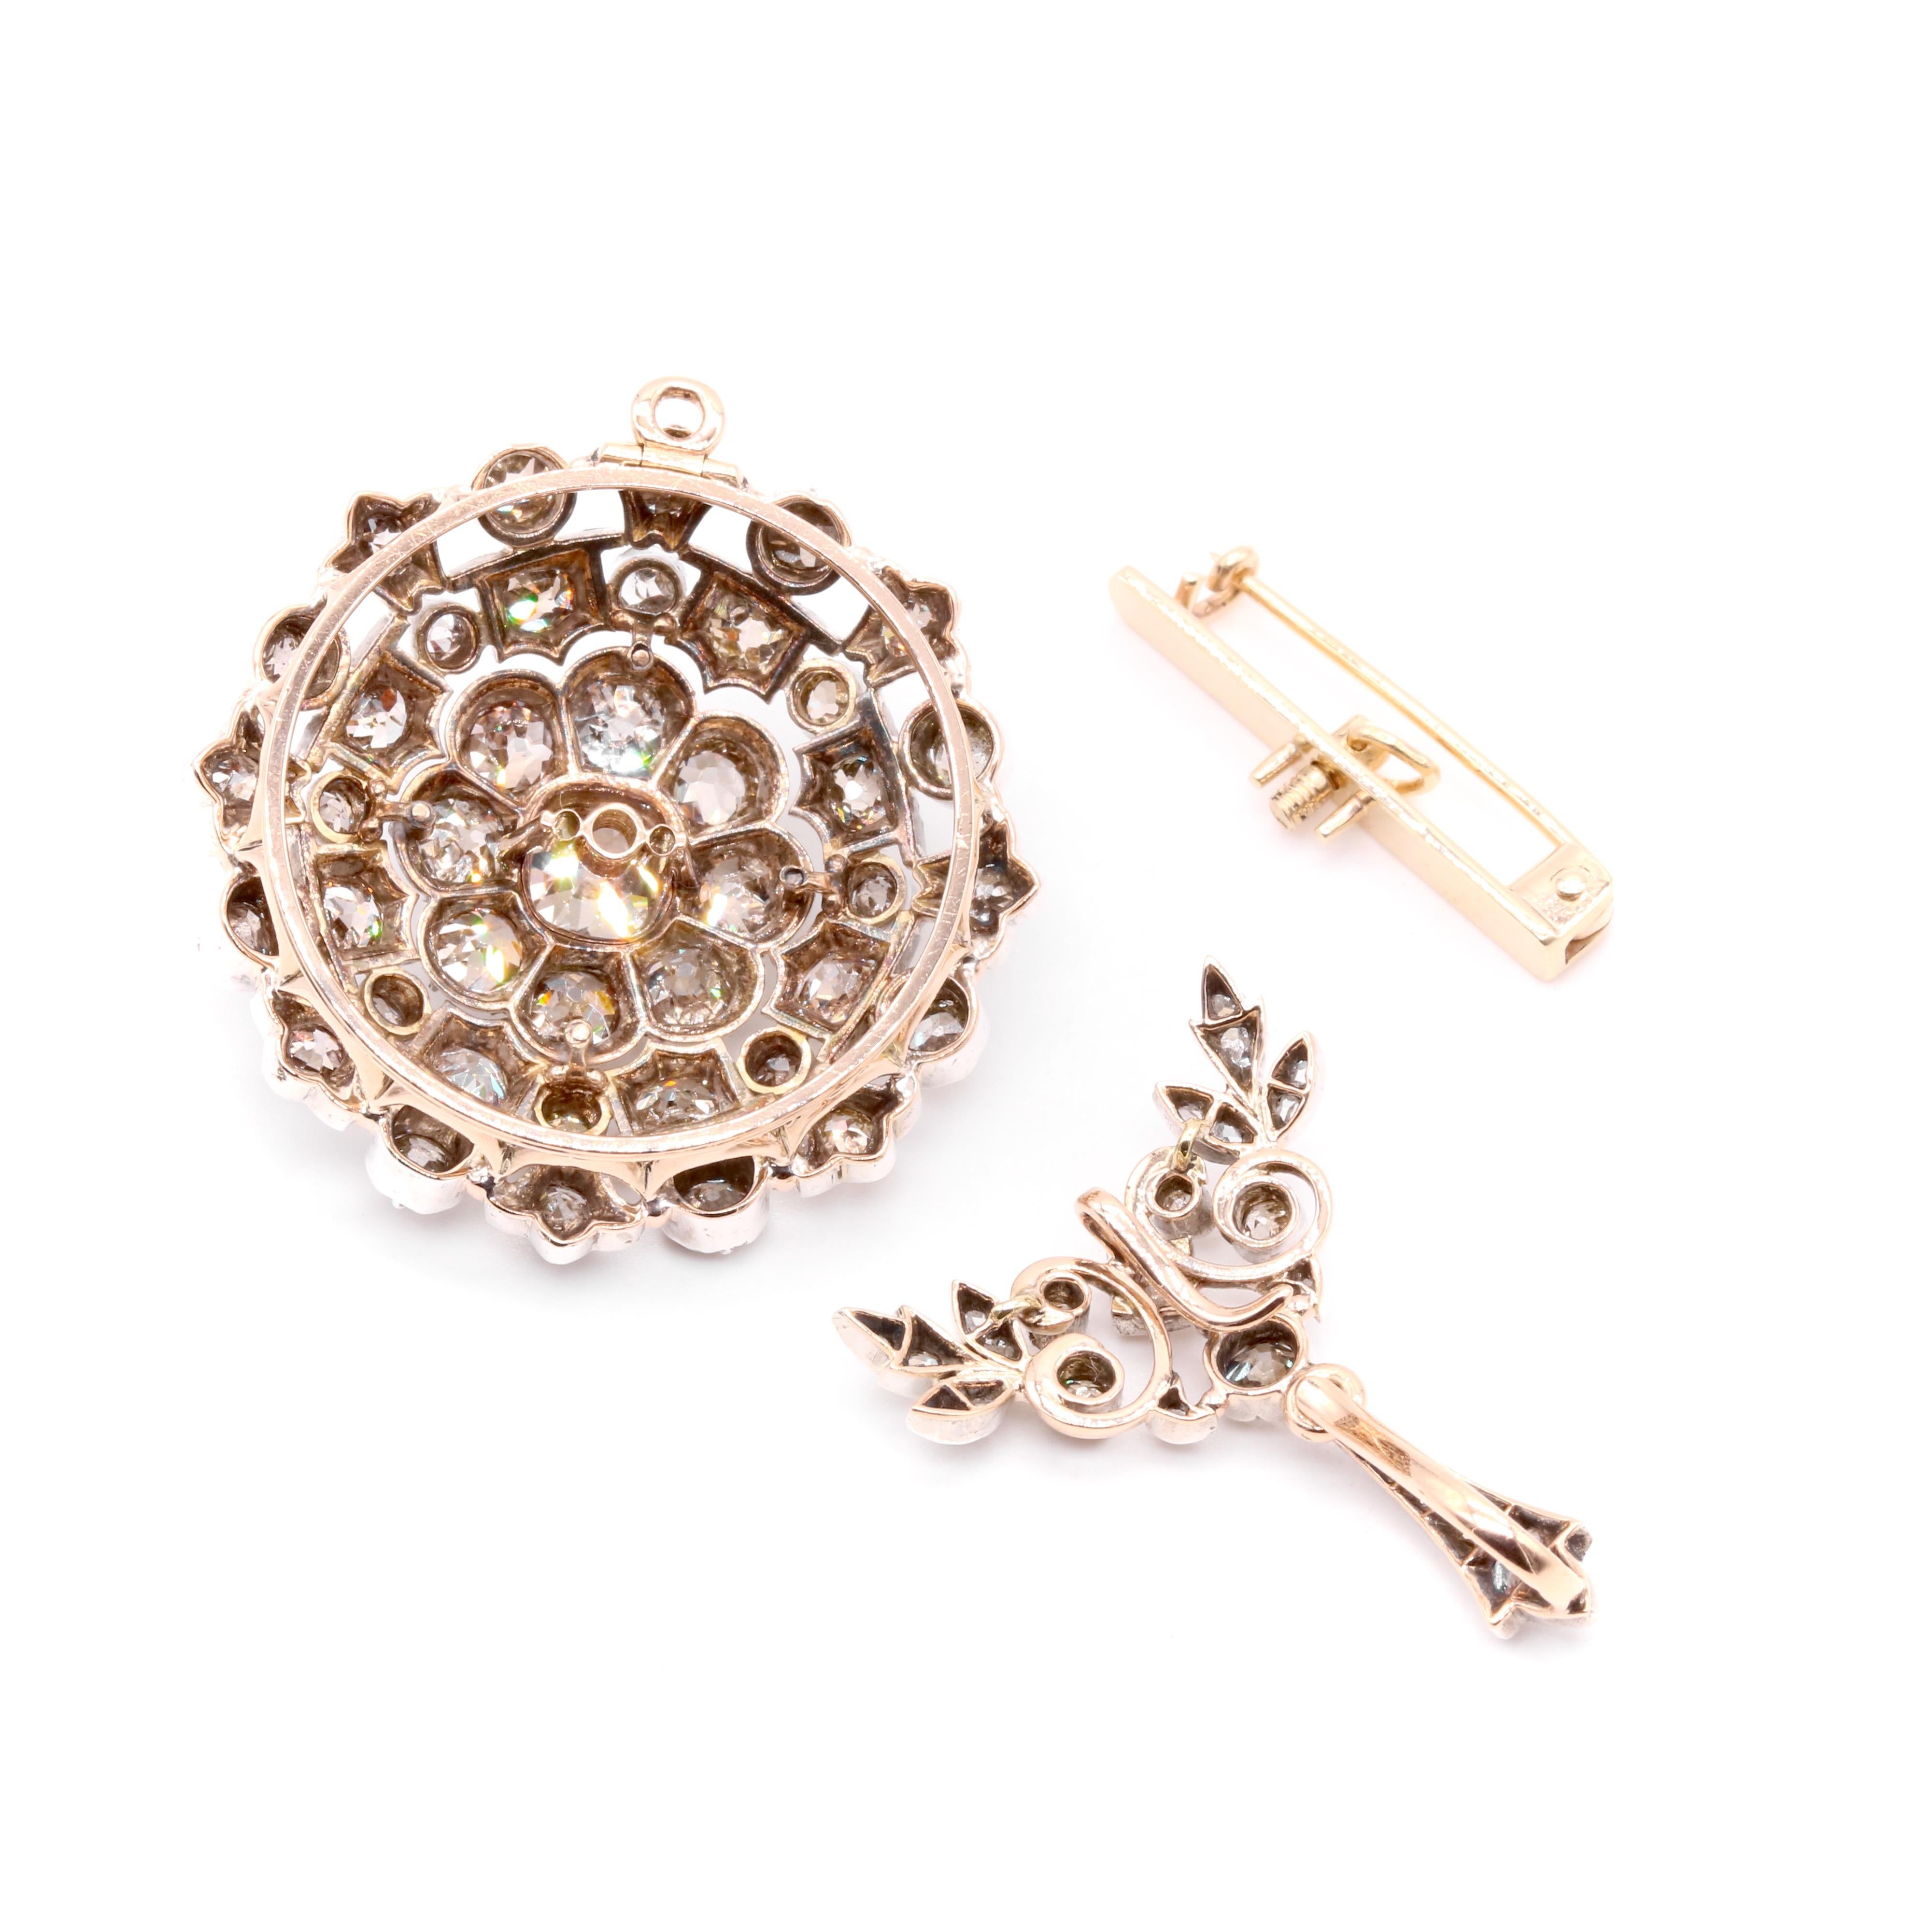 Antique Victorian 15K Gold & Silver 10.8ctw Old Cut Diamond Pendant & Brooch For Sale 6